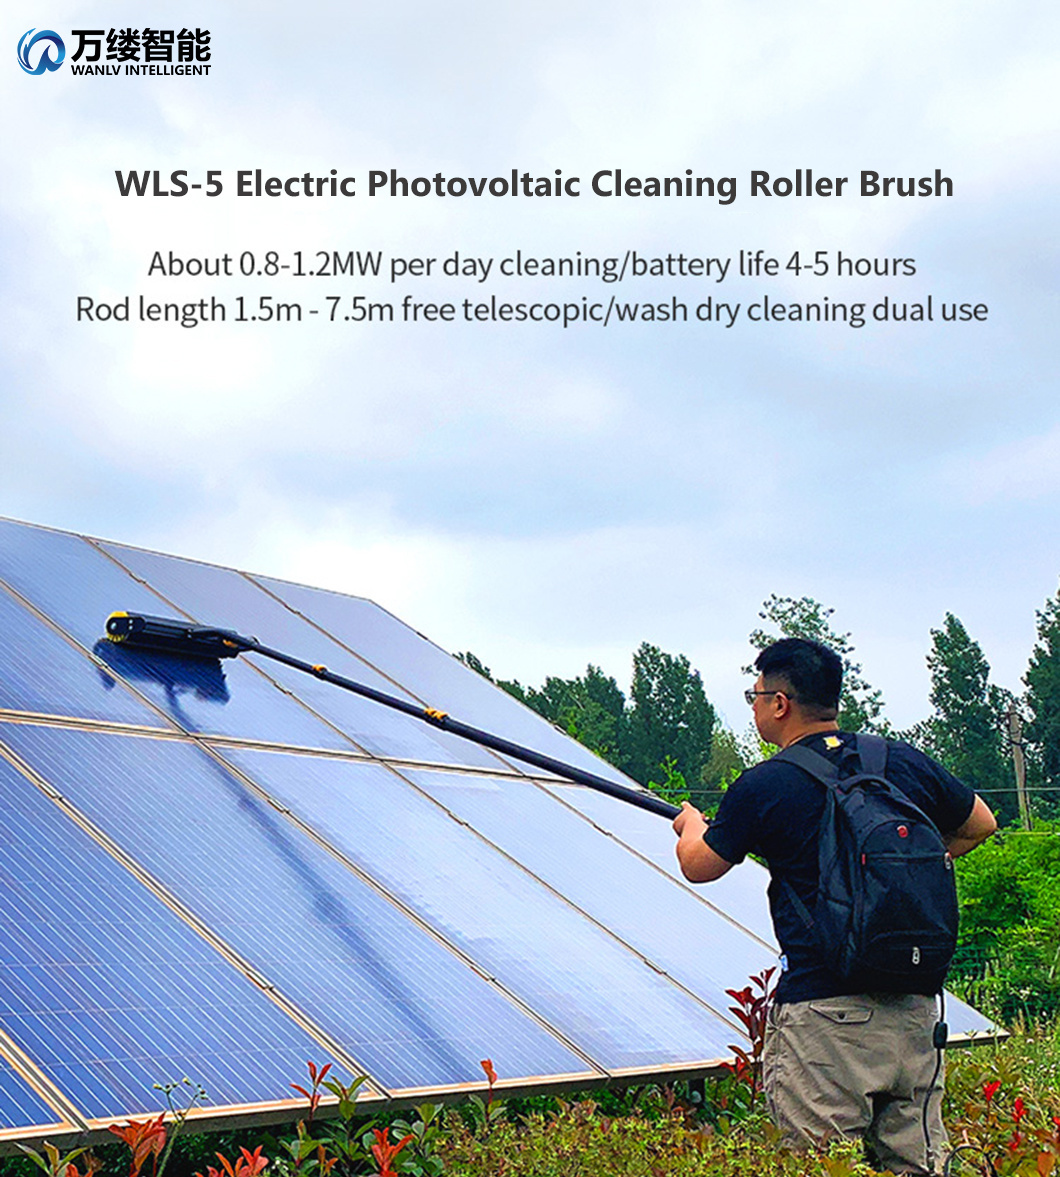 Easy to Use Electric Rolling Brush for Solar Panel Cleaning with 7.5 Meters Aluminum Alloy Handle